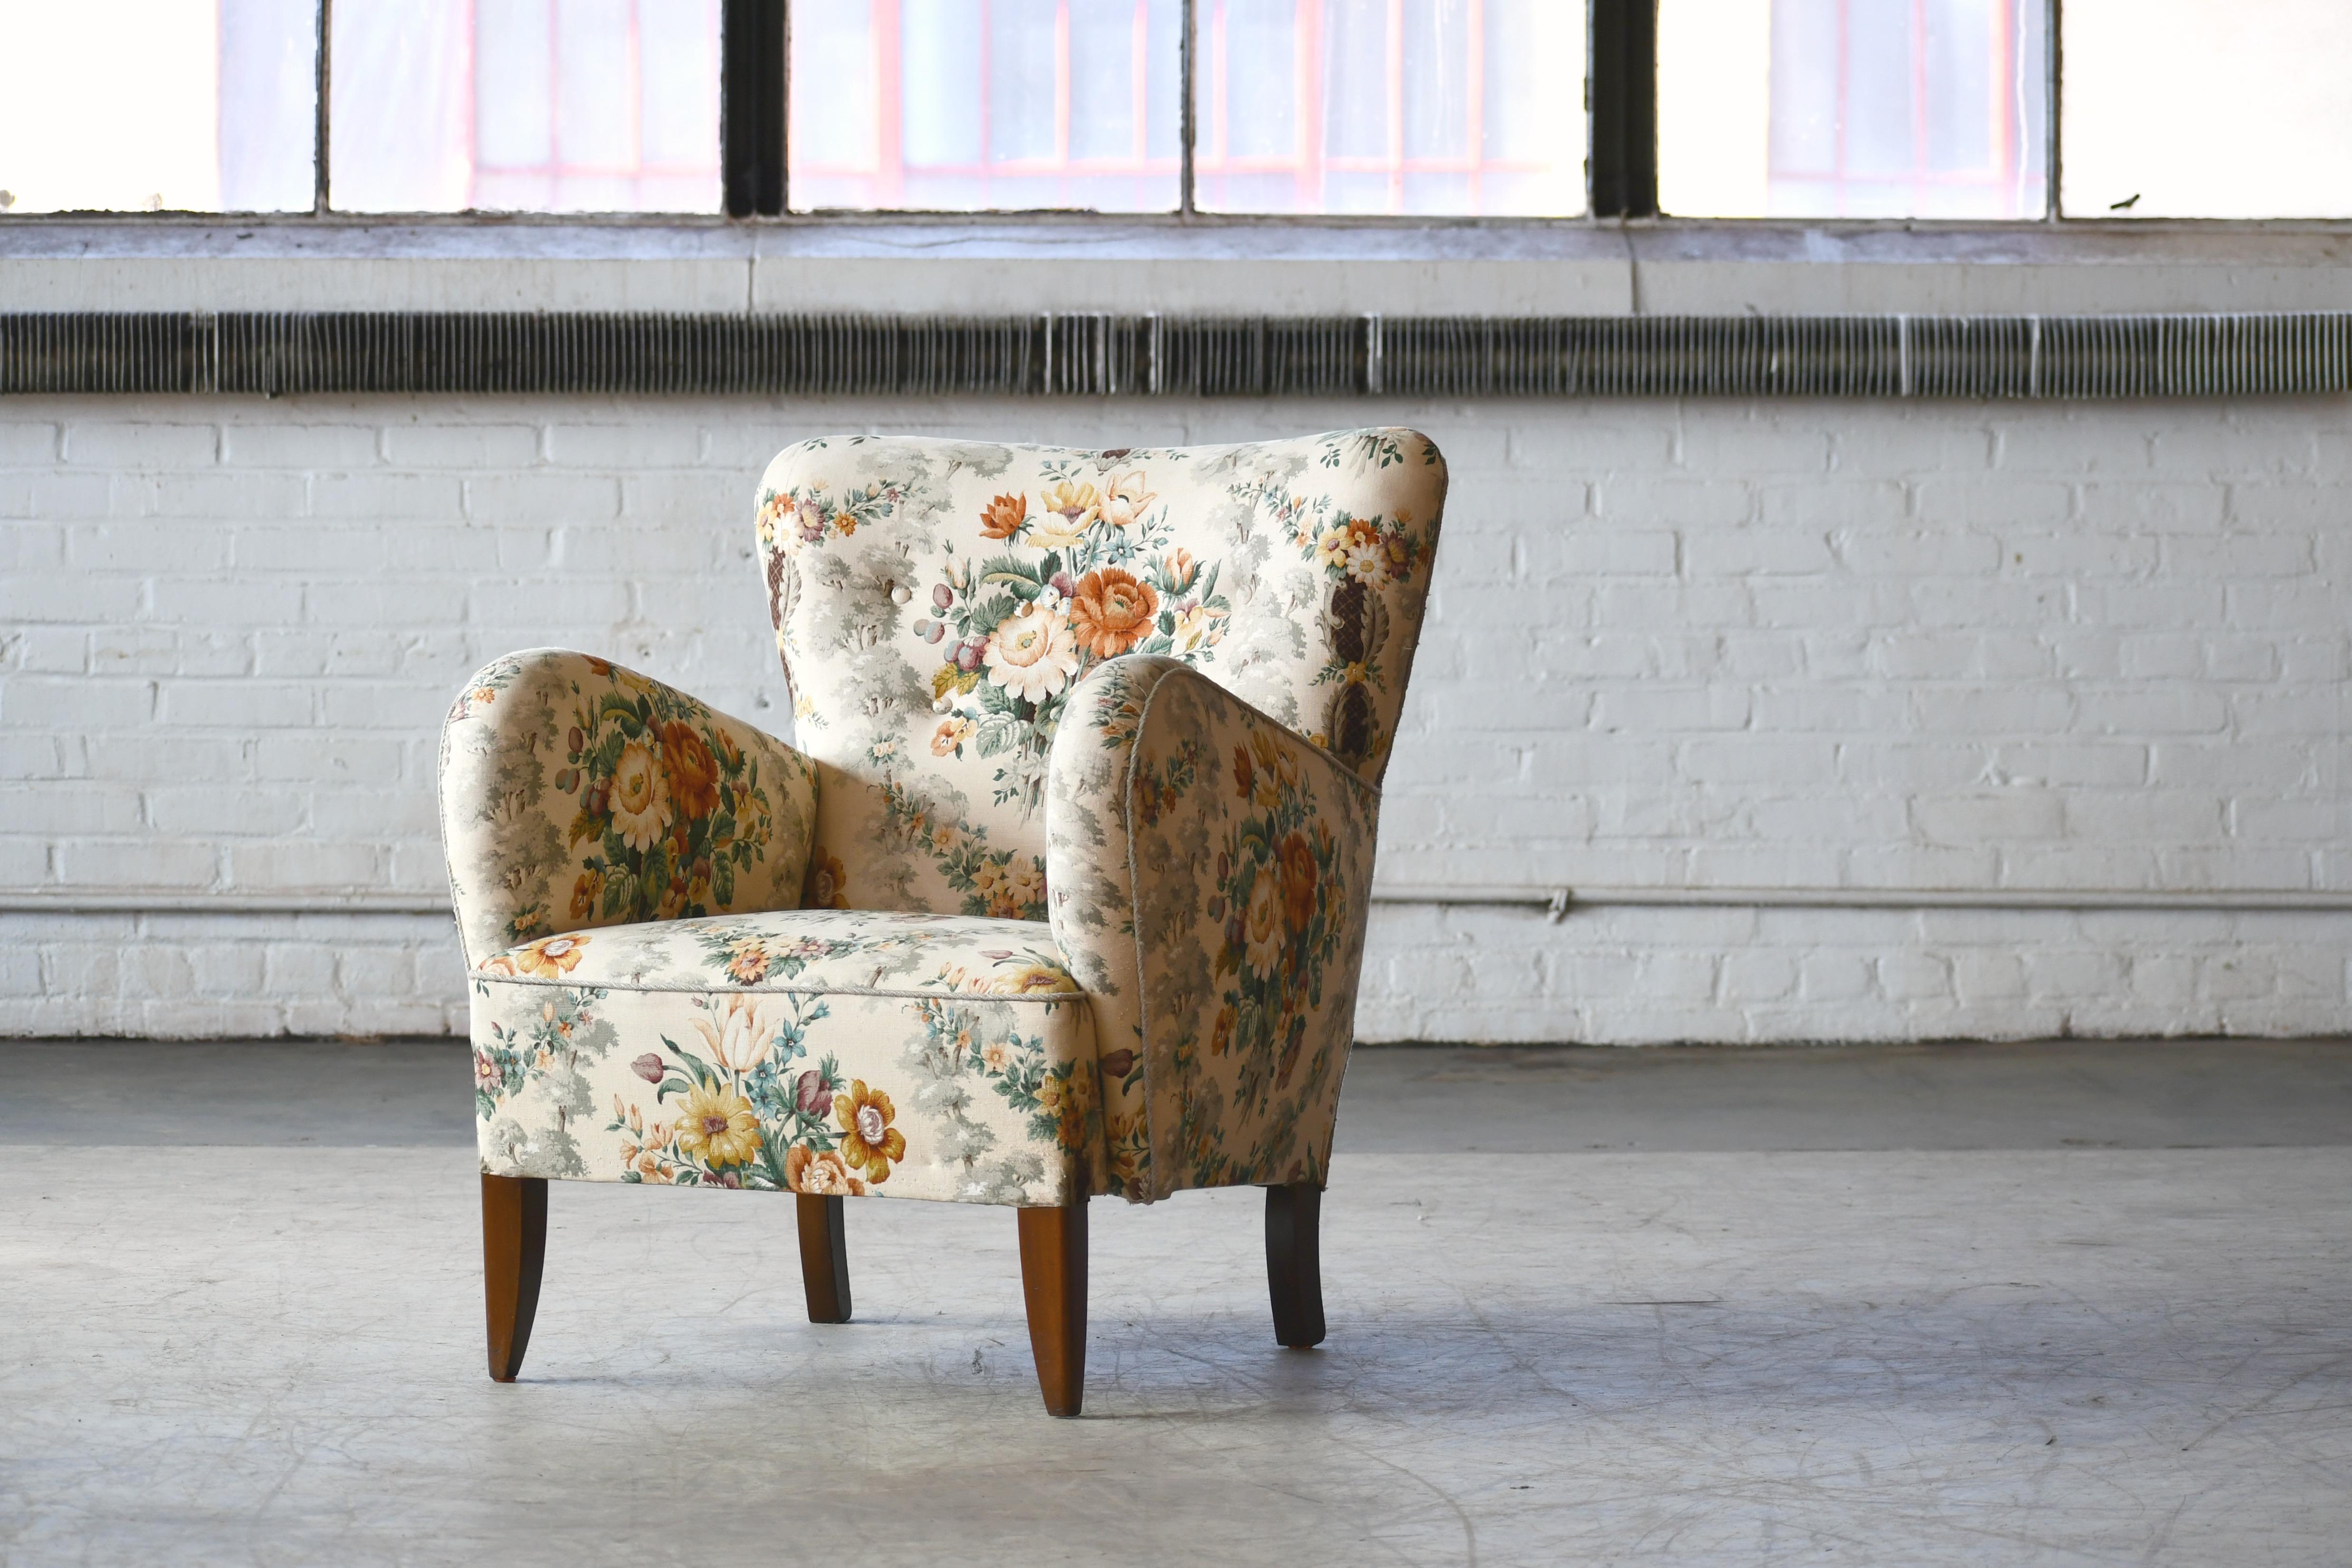 Mid-Century Modern Danish Midcentury 1940s Flemming Lassen Style Lounge Chair in Floral Fabric